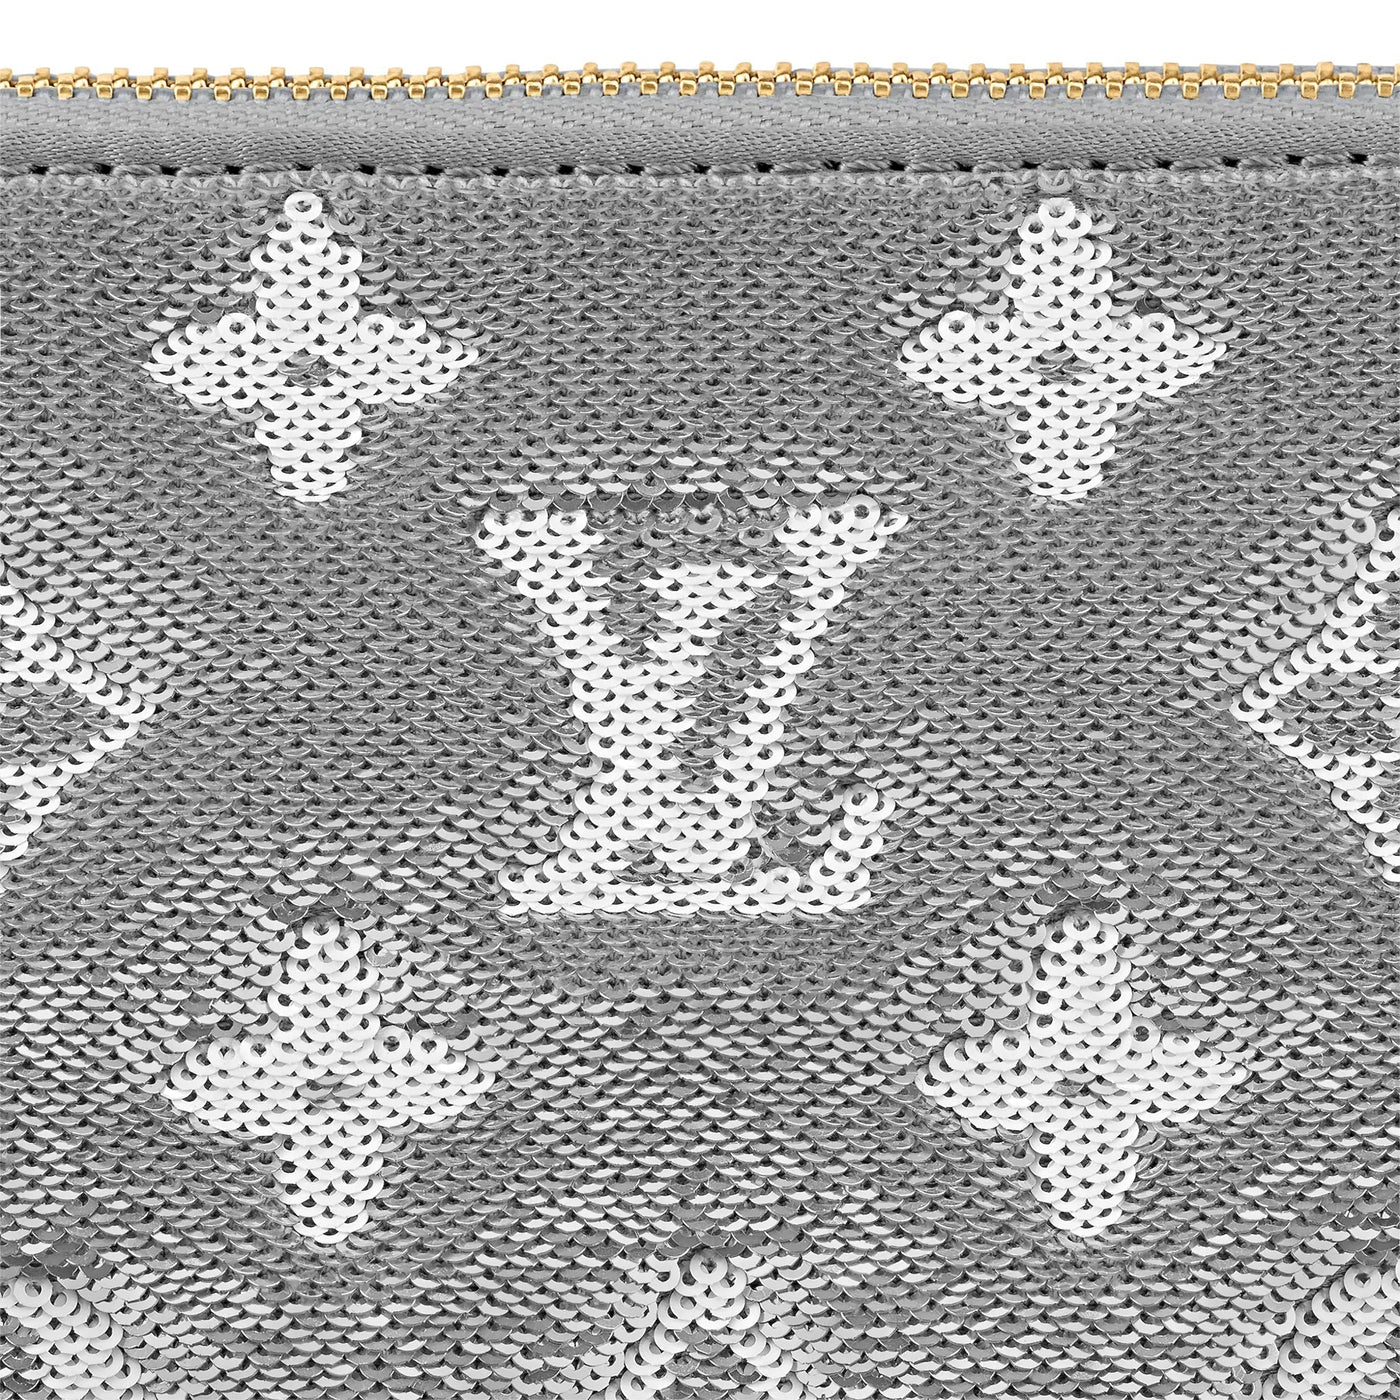 LOUIS VUITTON Satin Sequin Embroidered Monogram Coussin BB Silver 914818